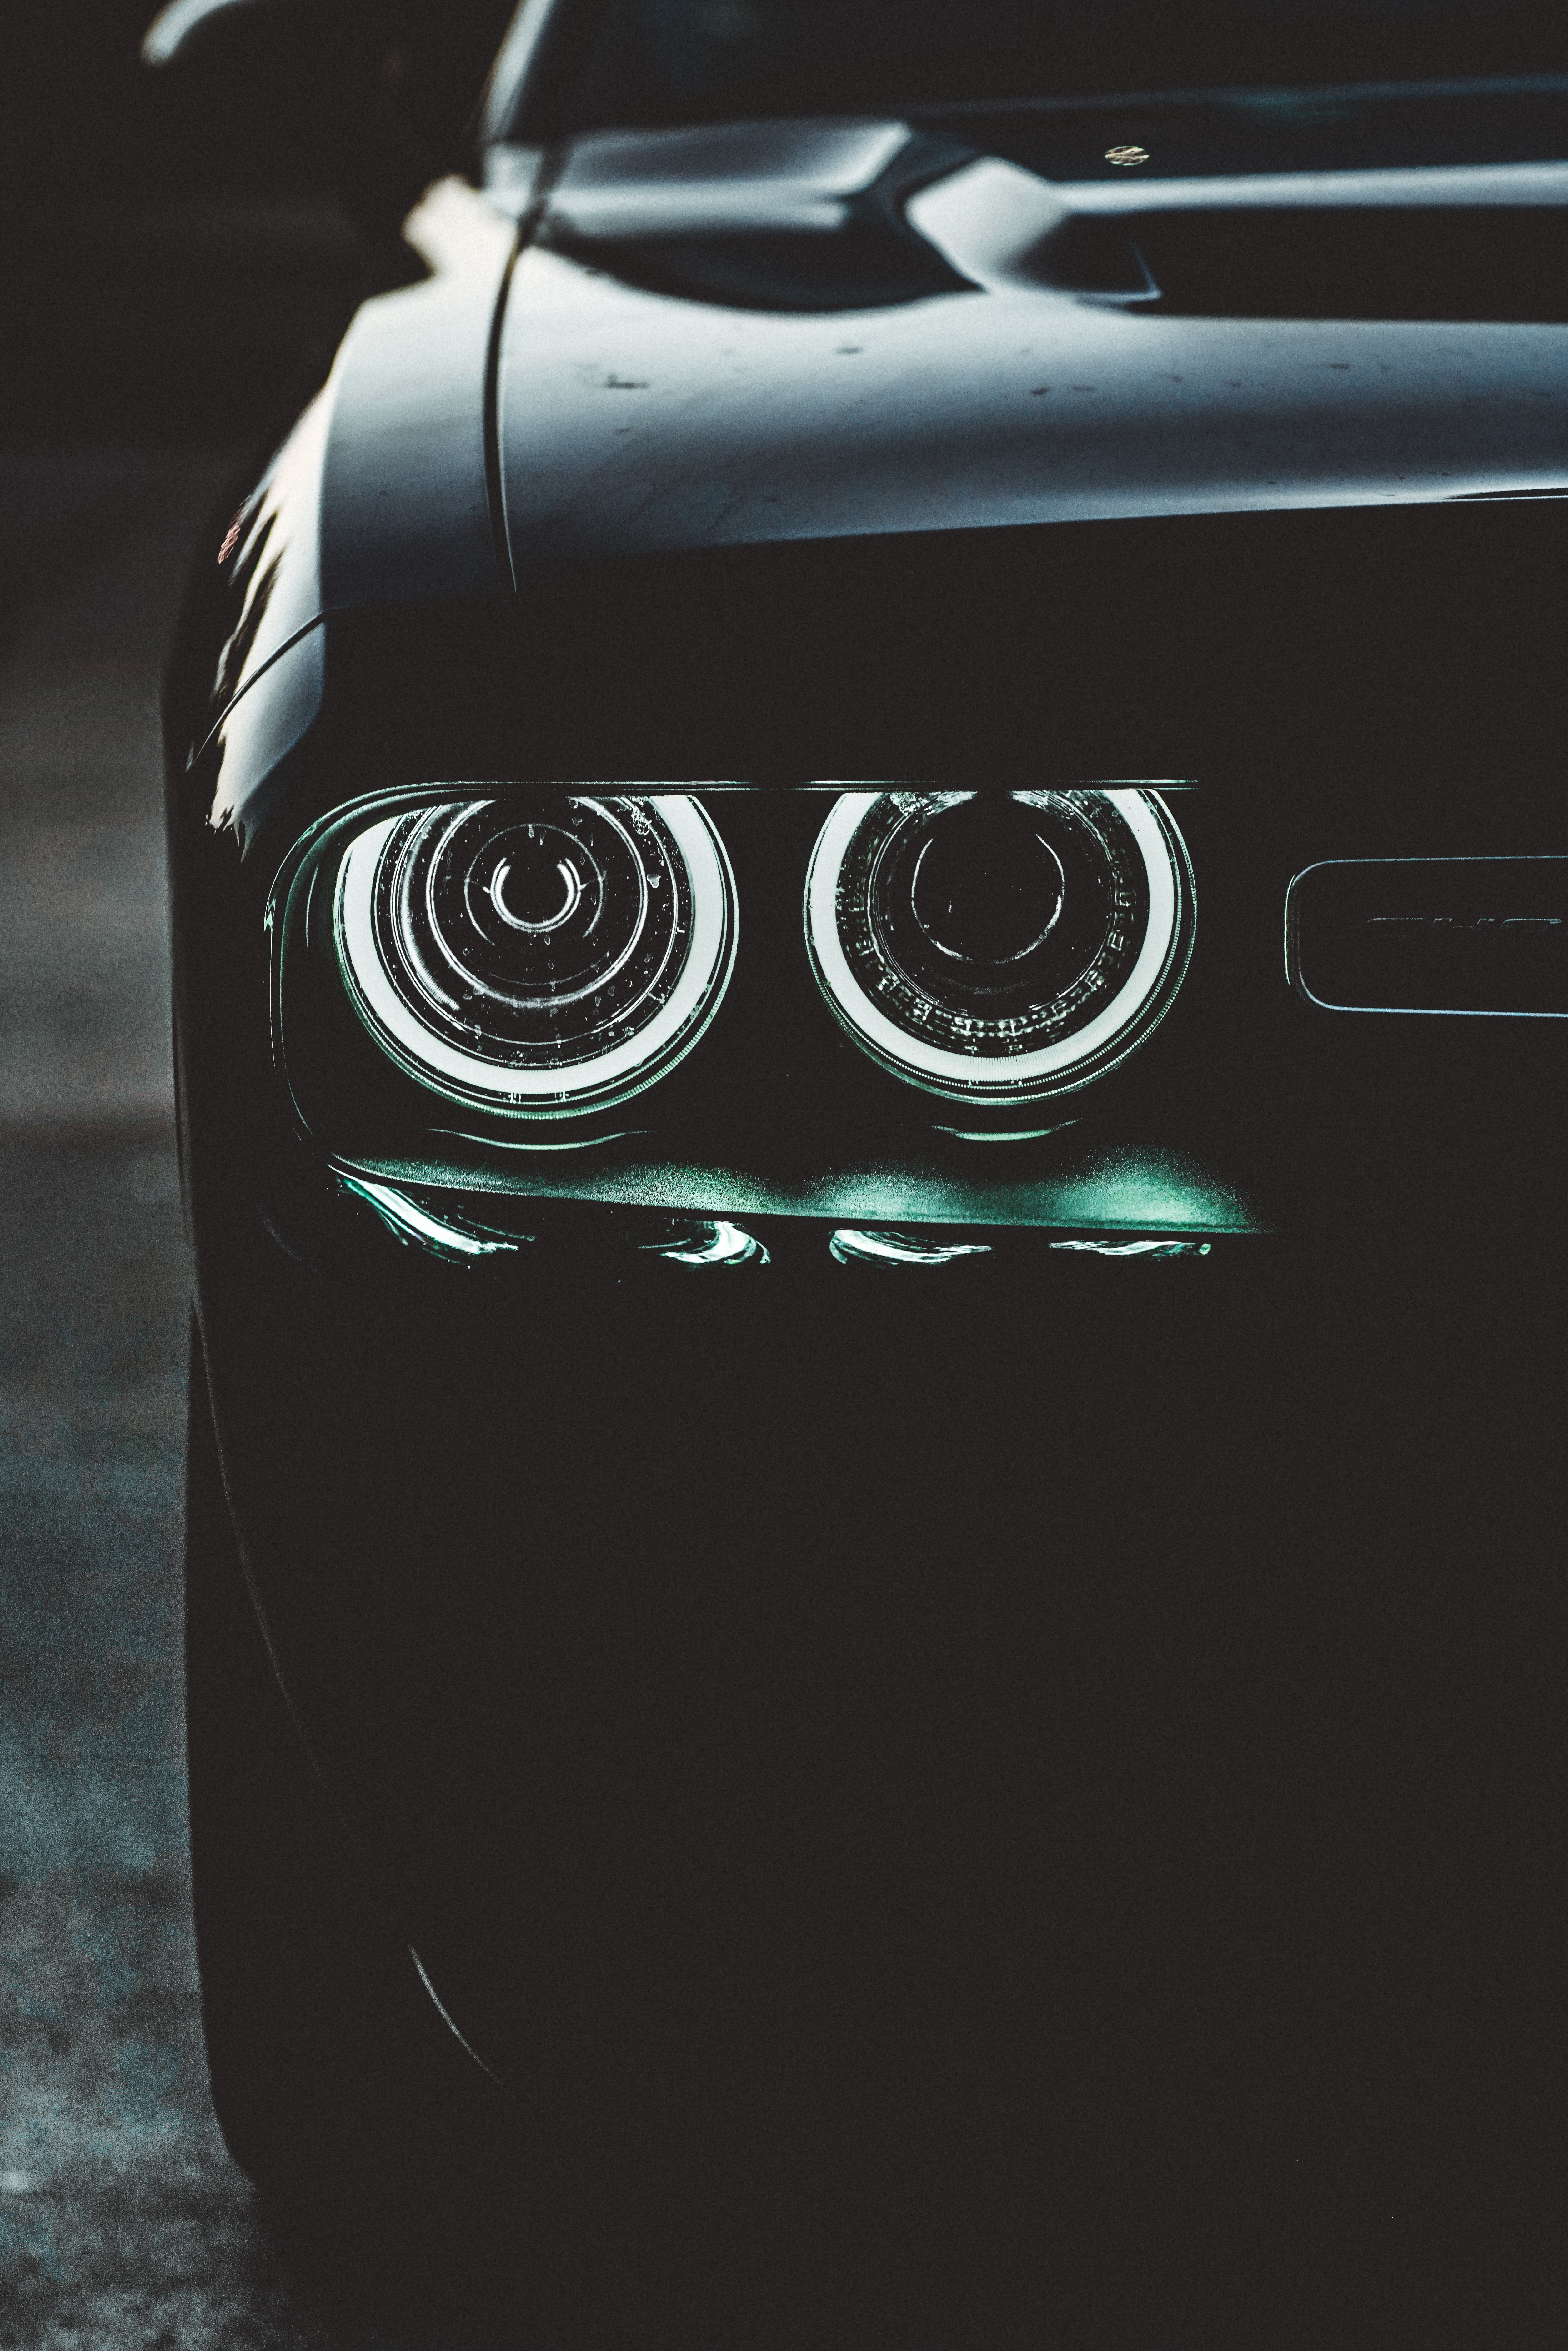 124672 download wallpaper dark, cars, black, lights, car, machine, backlight, illumination, headlights screensavers and pictures for free